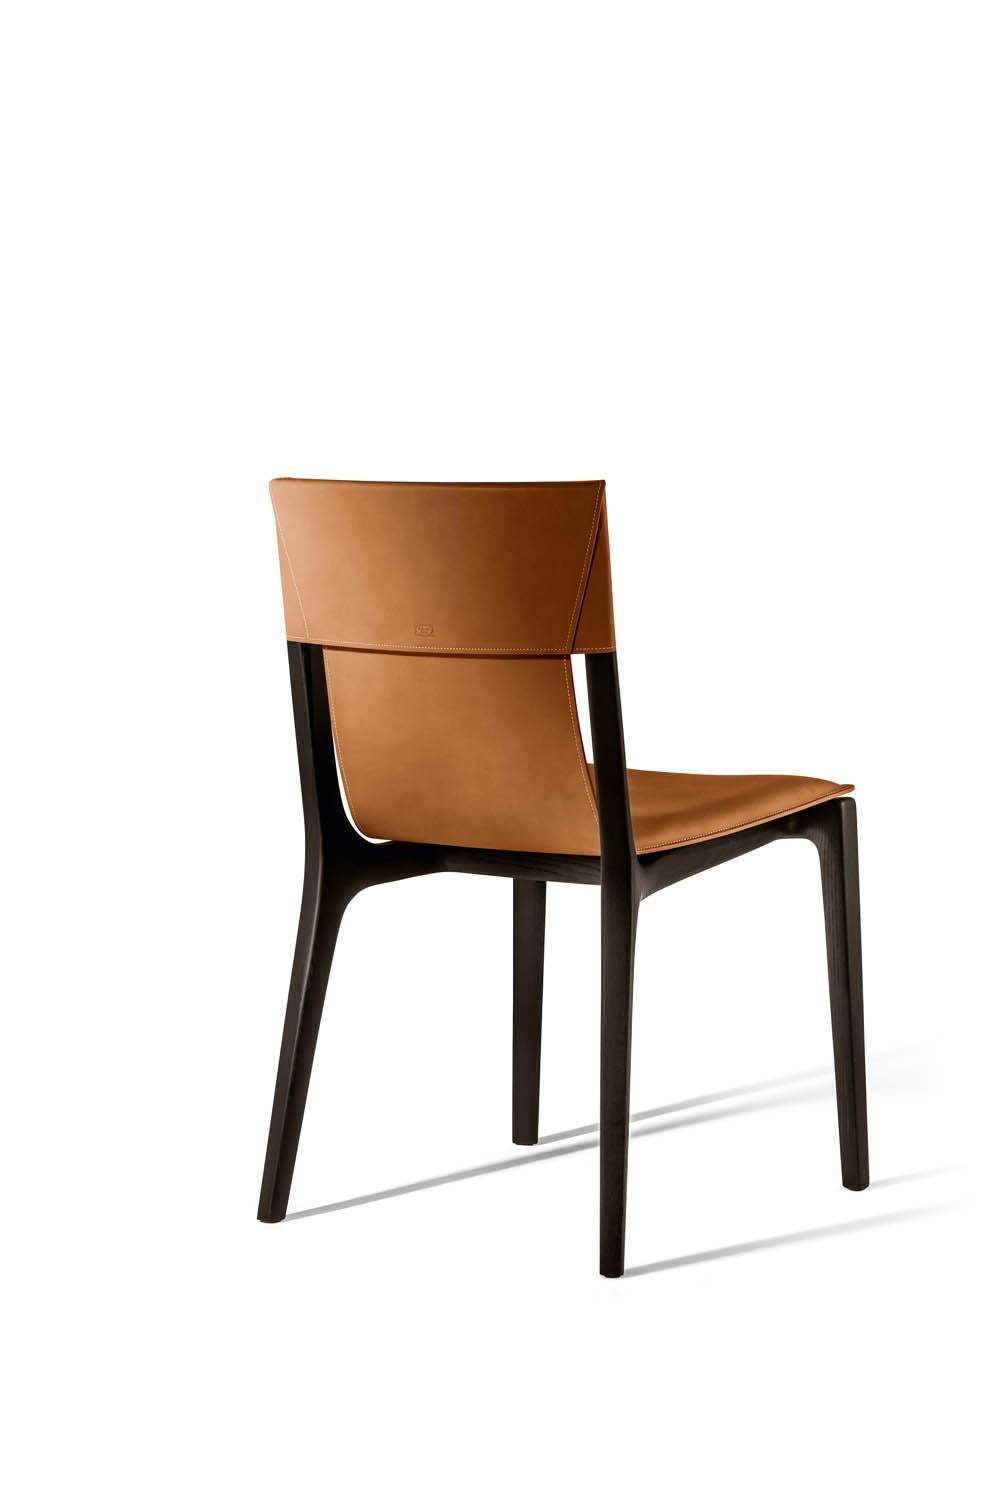 Modern Isadora Chair Cammello Saddle Extra leather Light Brown wengé finishes legs For Sale